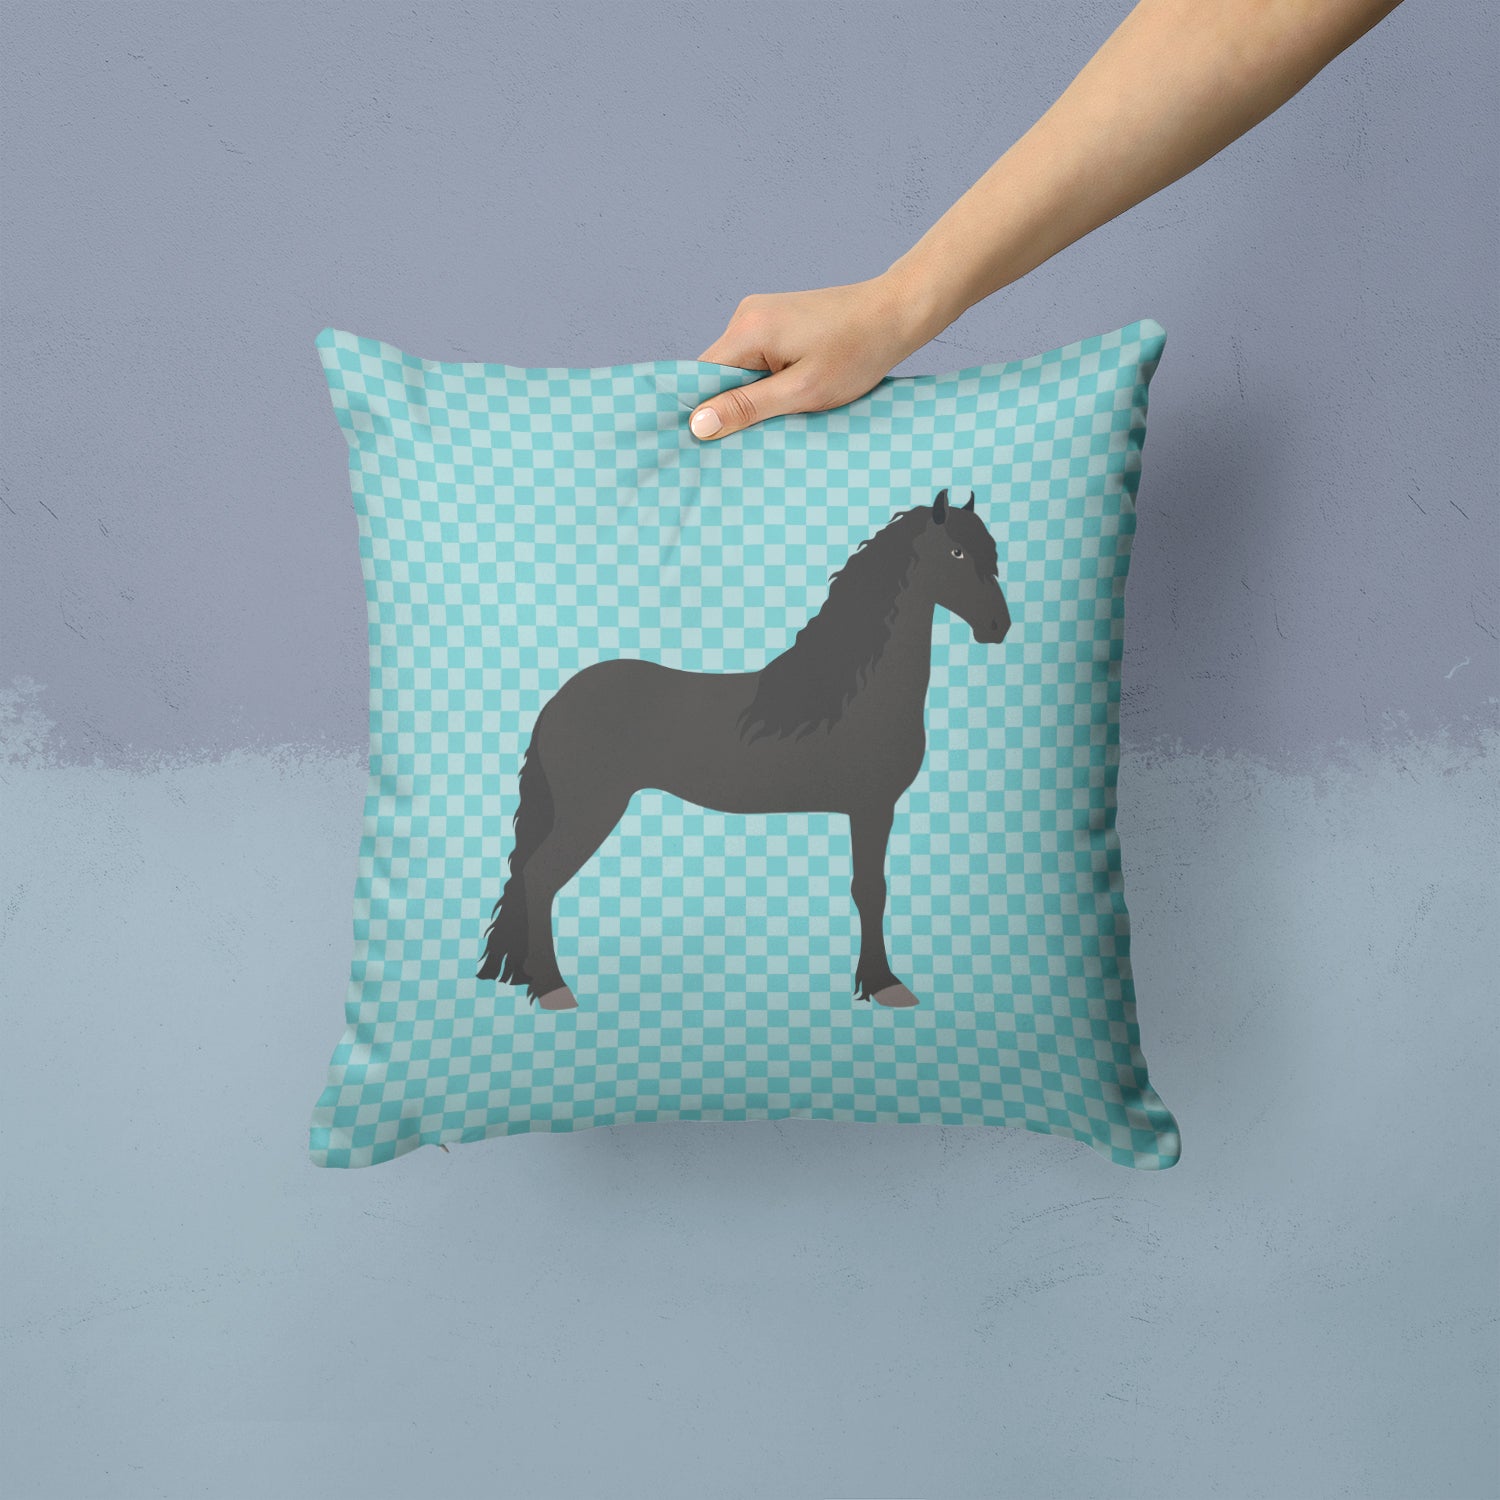 Friesian Horse Blue Check Fabric Decorative Pillow BB8089PW1414 - the-store.com